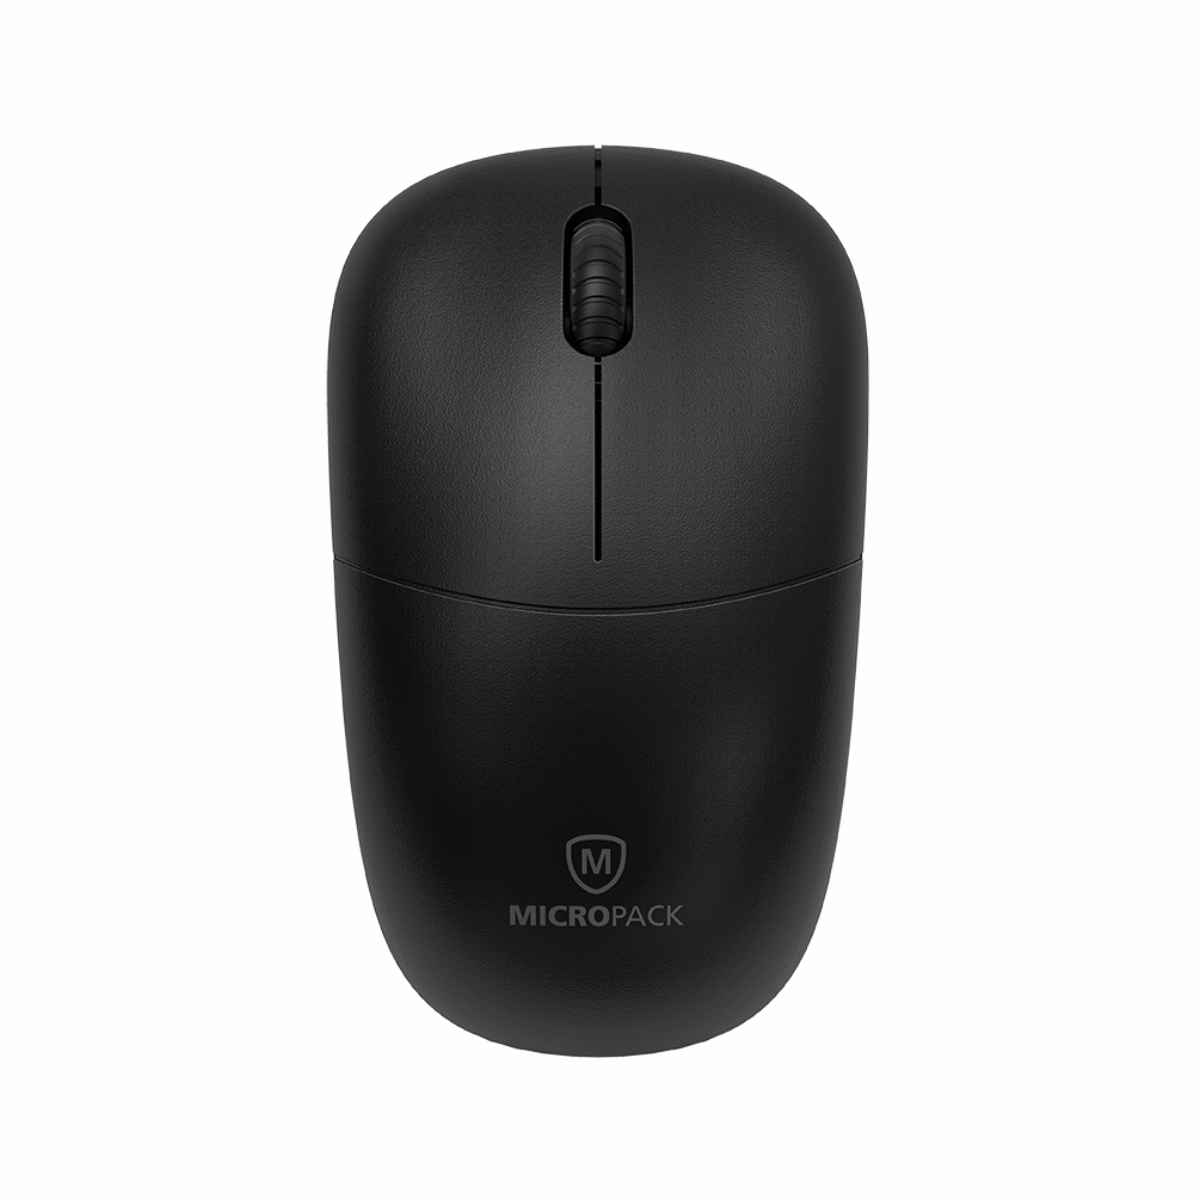 2.4G Wireless Mouse for Computer Laptop MP-712W black